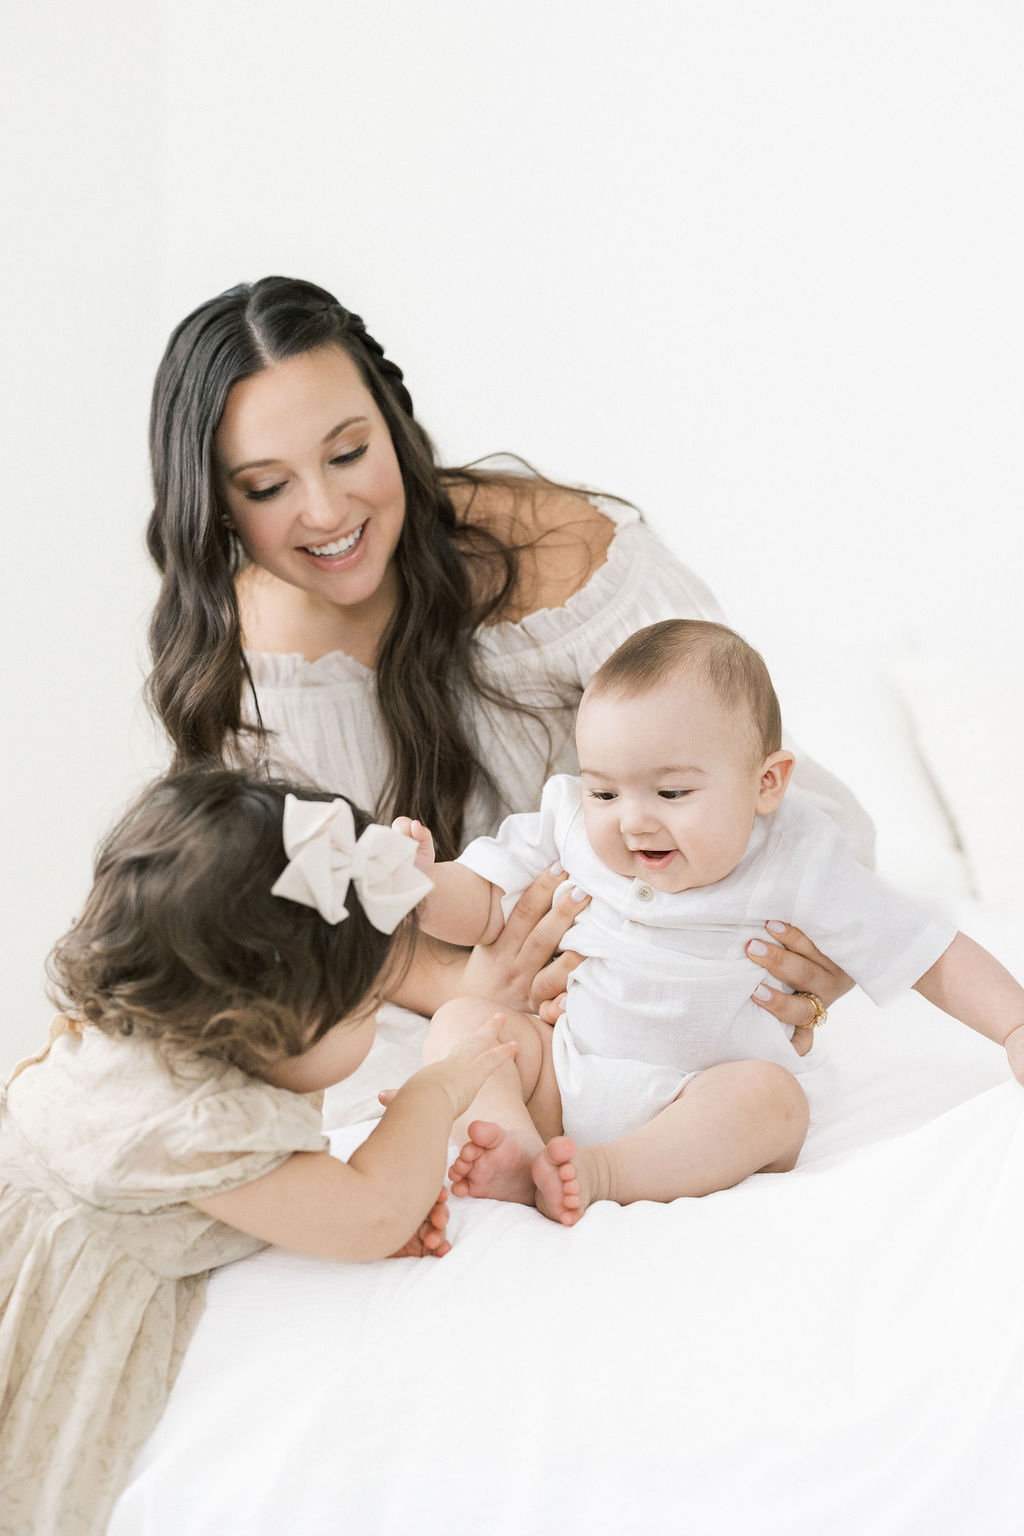 A toddler with dark hair plays with her newborn sibling and mom on a white bed postpartum place chatham